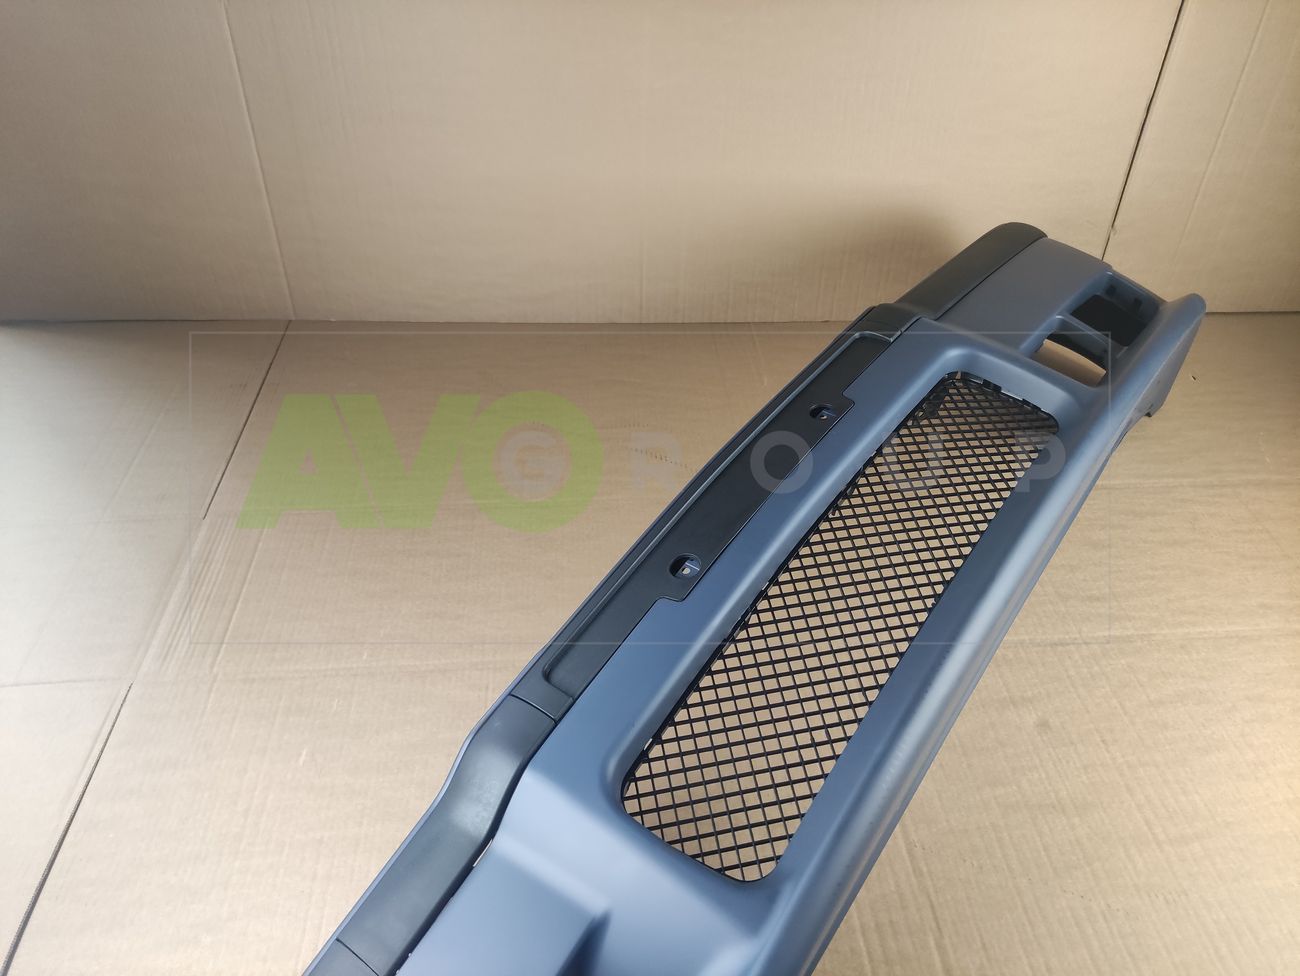 M3 / M-Sport Front bumper made from ABS Plastic for BMW e36